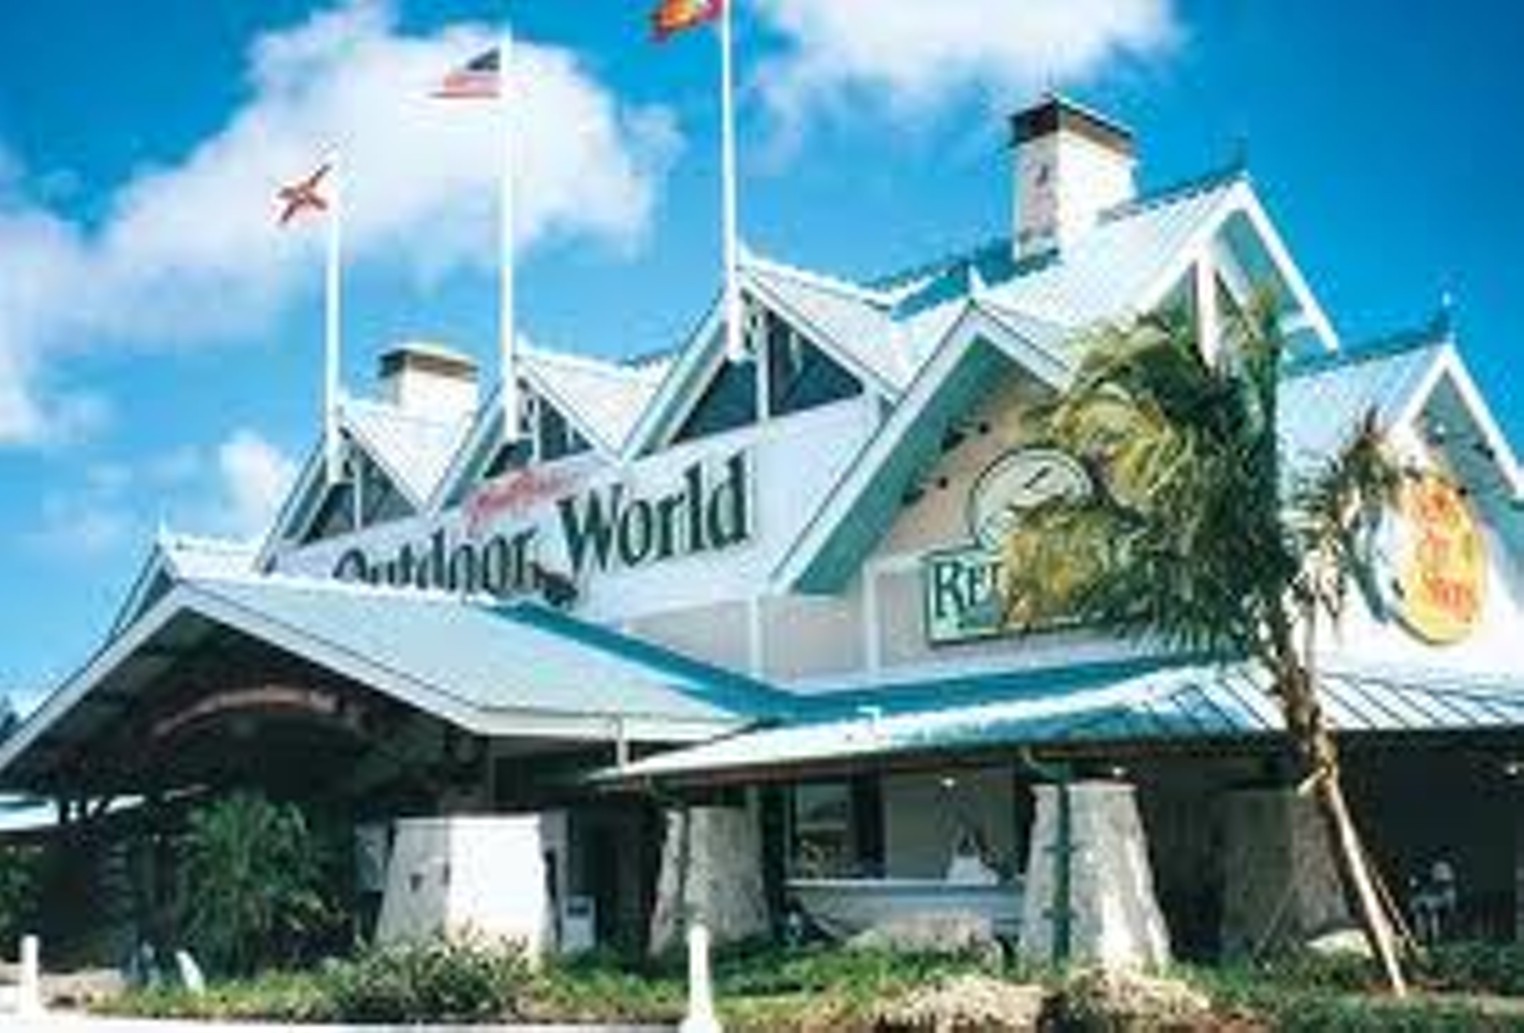 Bass Pro Shop Outdoor World, Hollywood, Retail